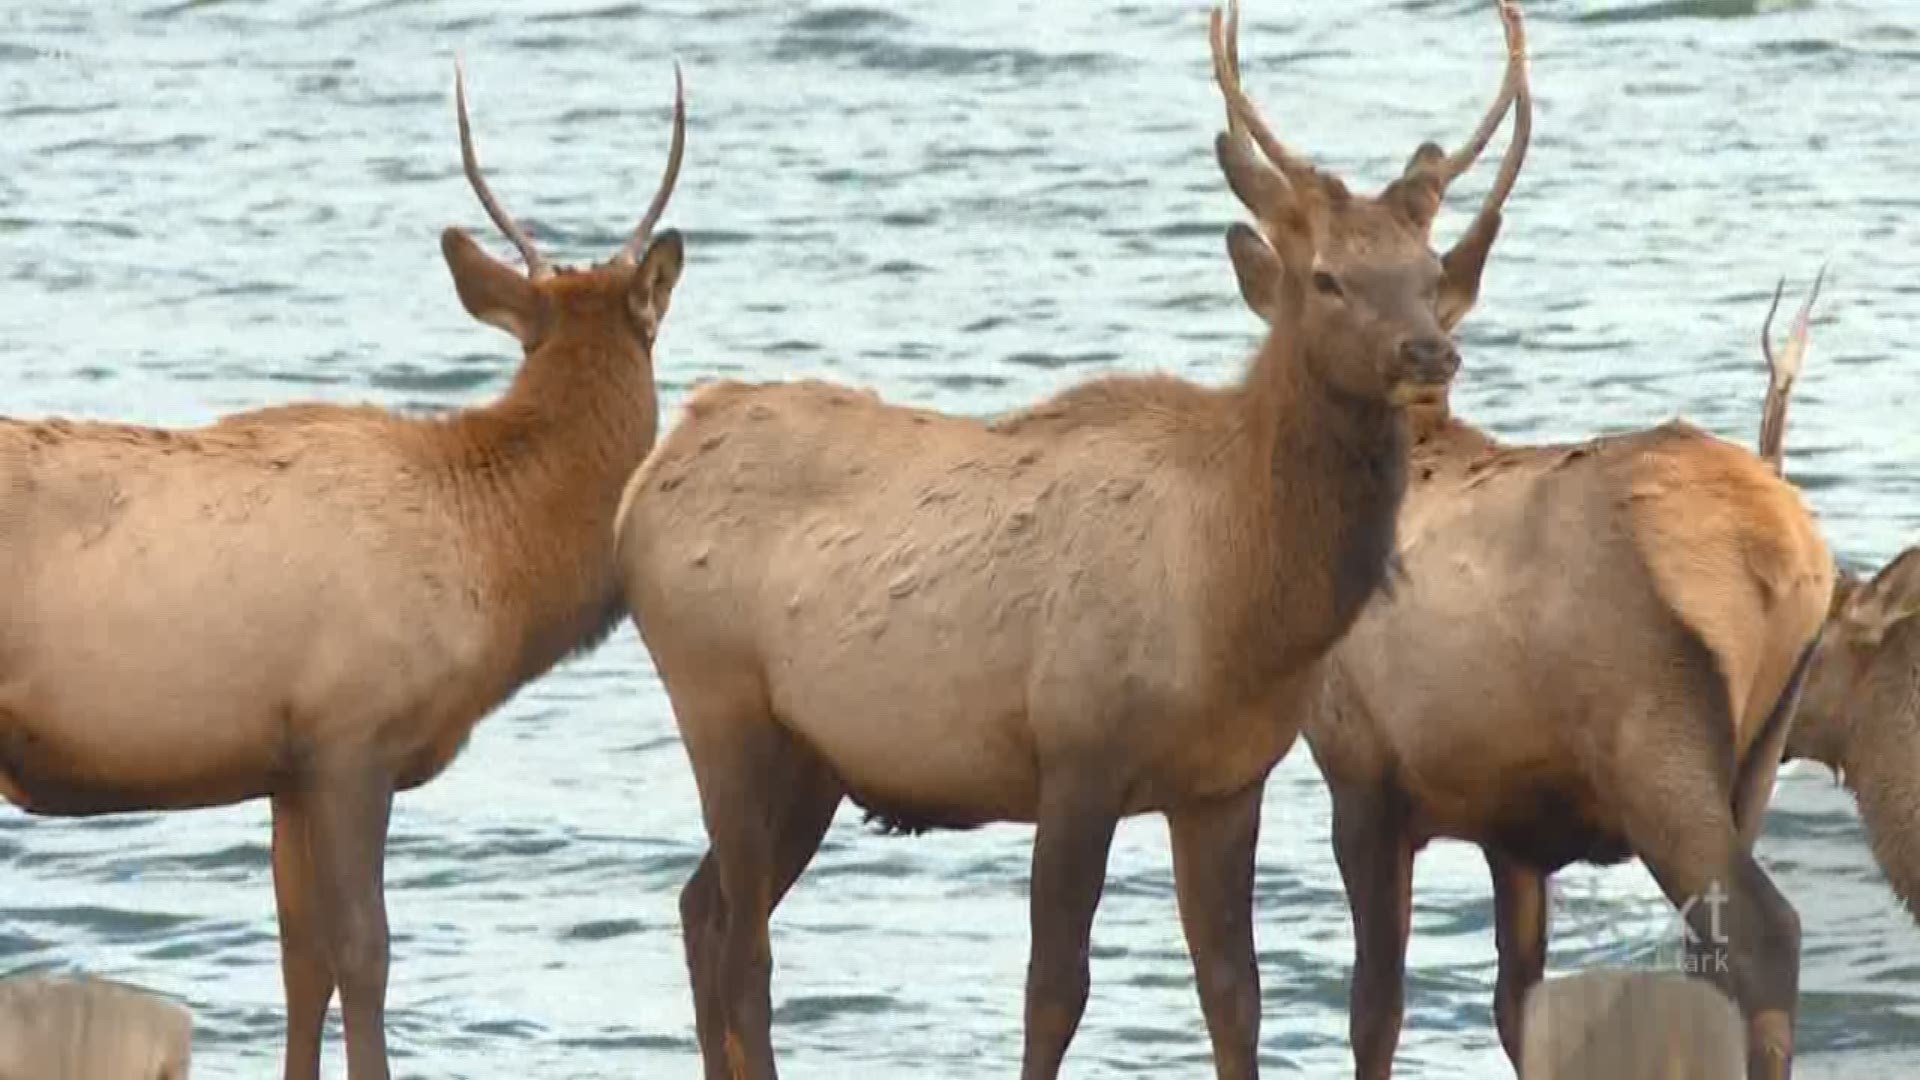 We're now at the point in Estes Park where elk need a police escort to make sure people don't get too close to them.